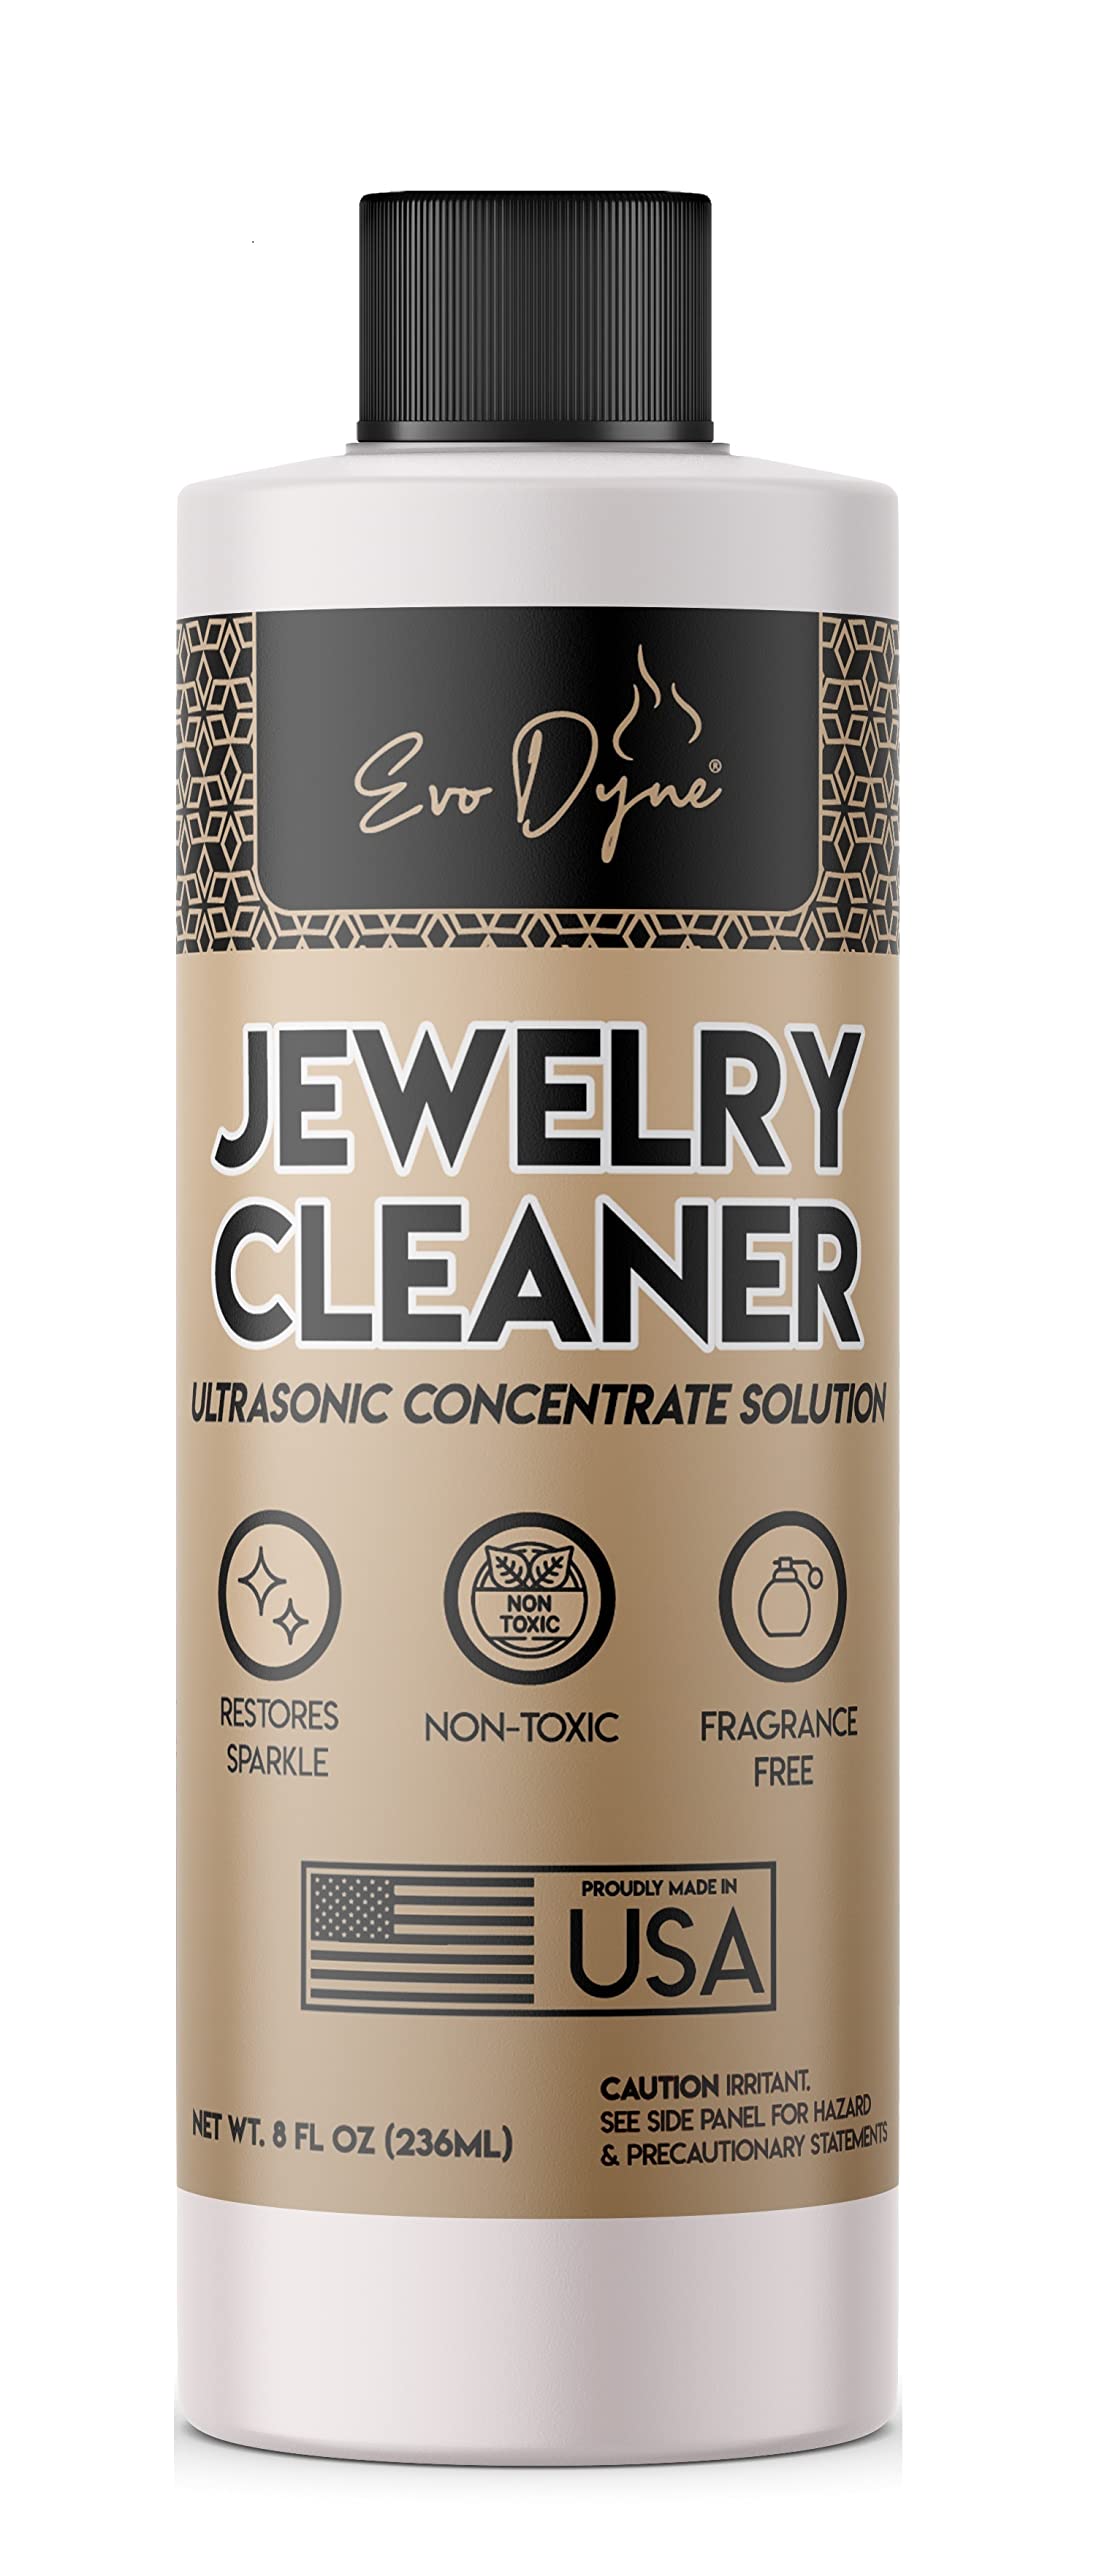 Evo Dyne Ultrasonic Jewelry cleaner - Jewelry cleaner Solution for Diamond,  gold, Silver, gemstones - Best Extra concent